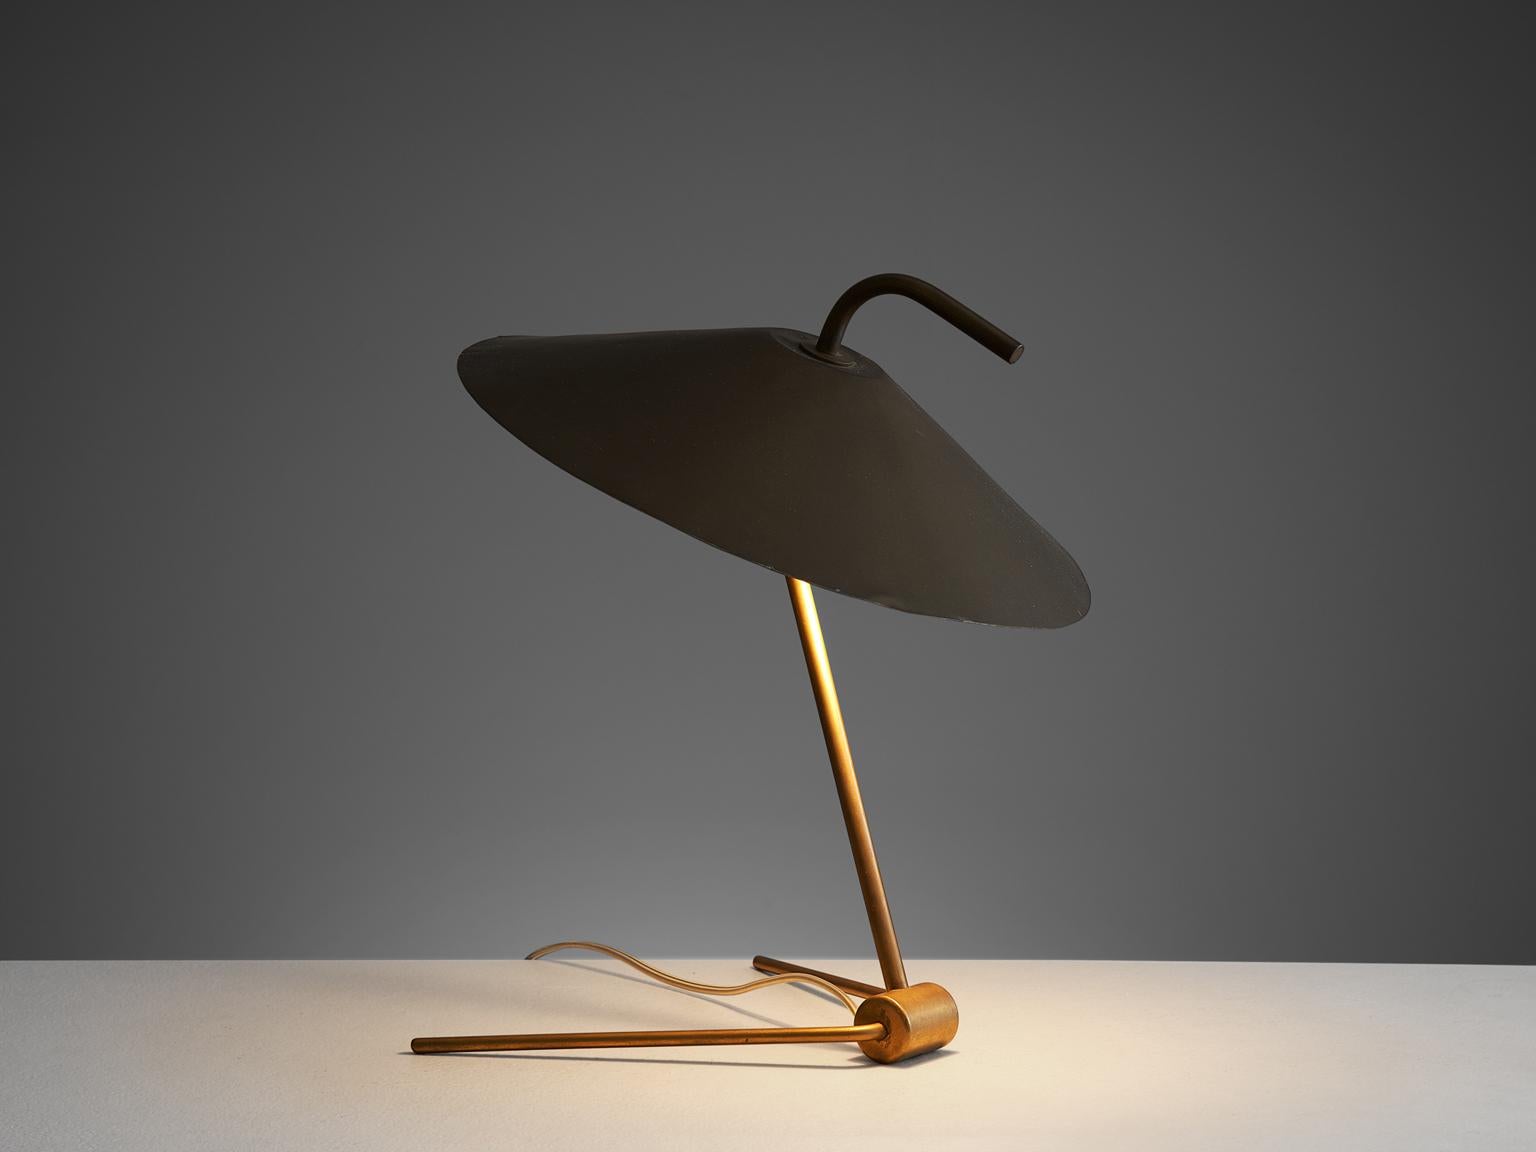 Nikolay Diulgheroff, desk light, brass and metal, Italy, 1940s.

This futuristic table lamp is designed by the Bulgarian artist, architect and designer Nikolay Diulgheroff. The piece has a brass tripod foot and a large round shade. On the top of